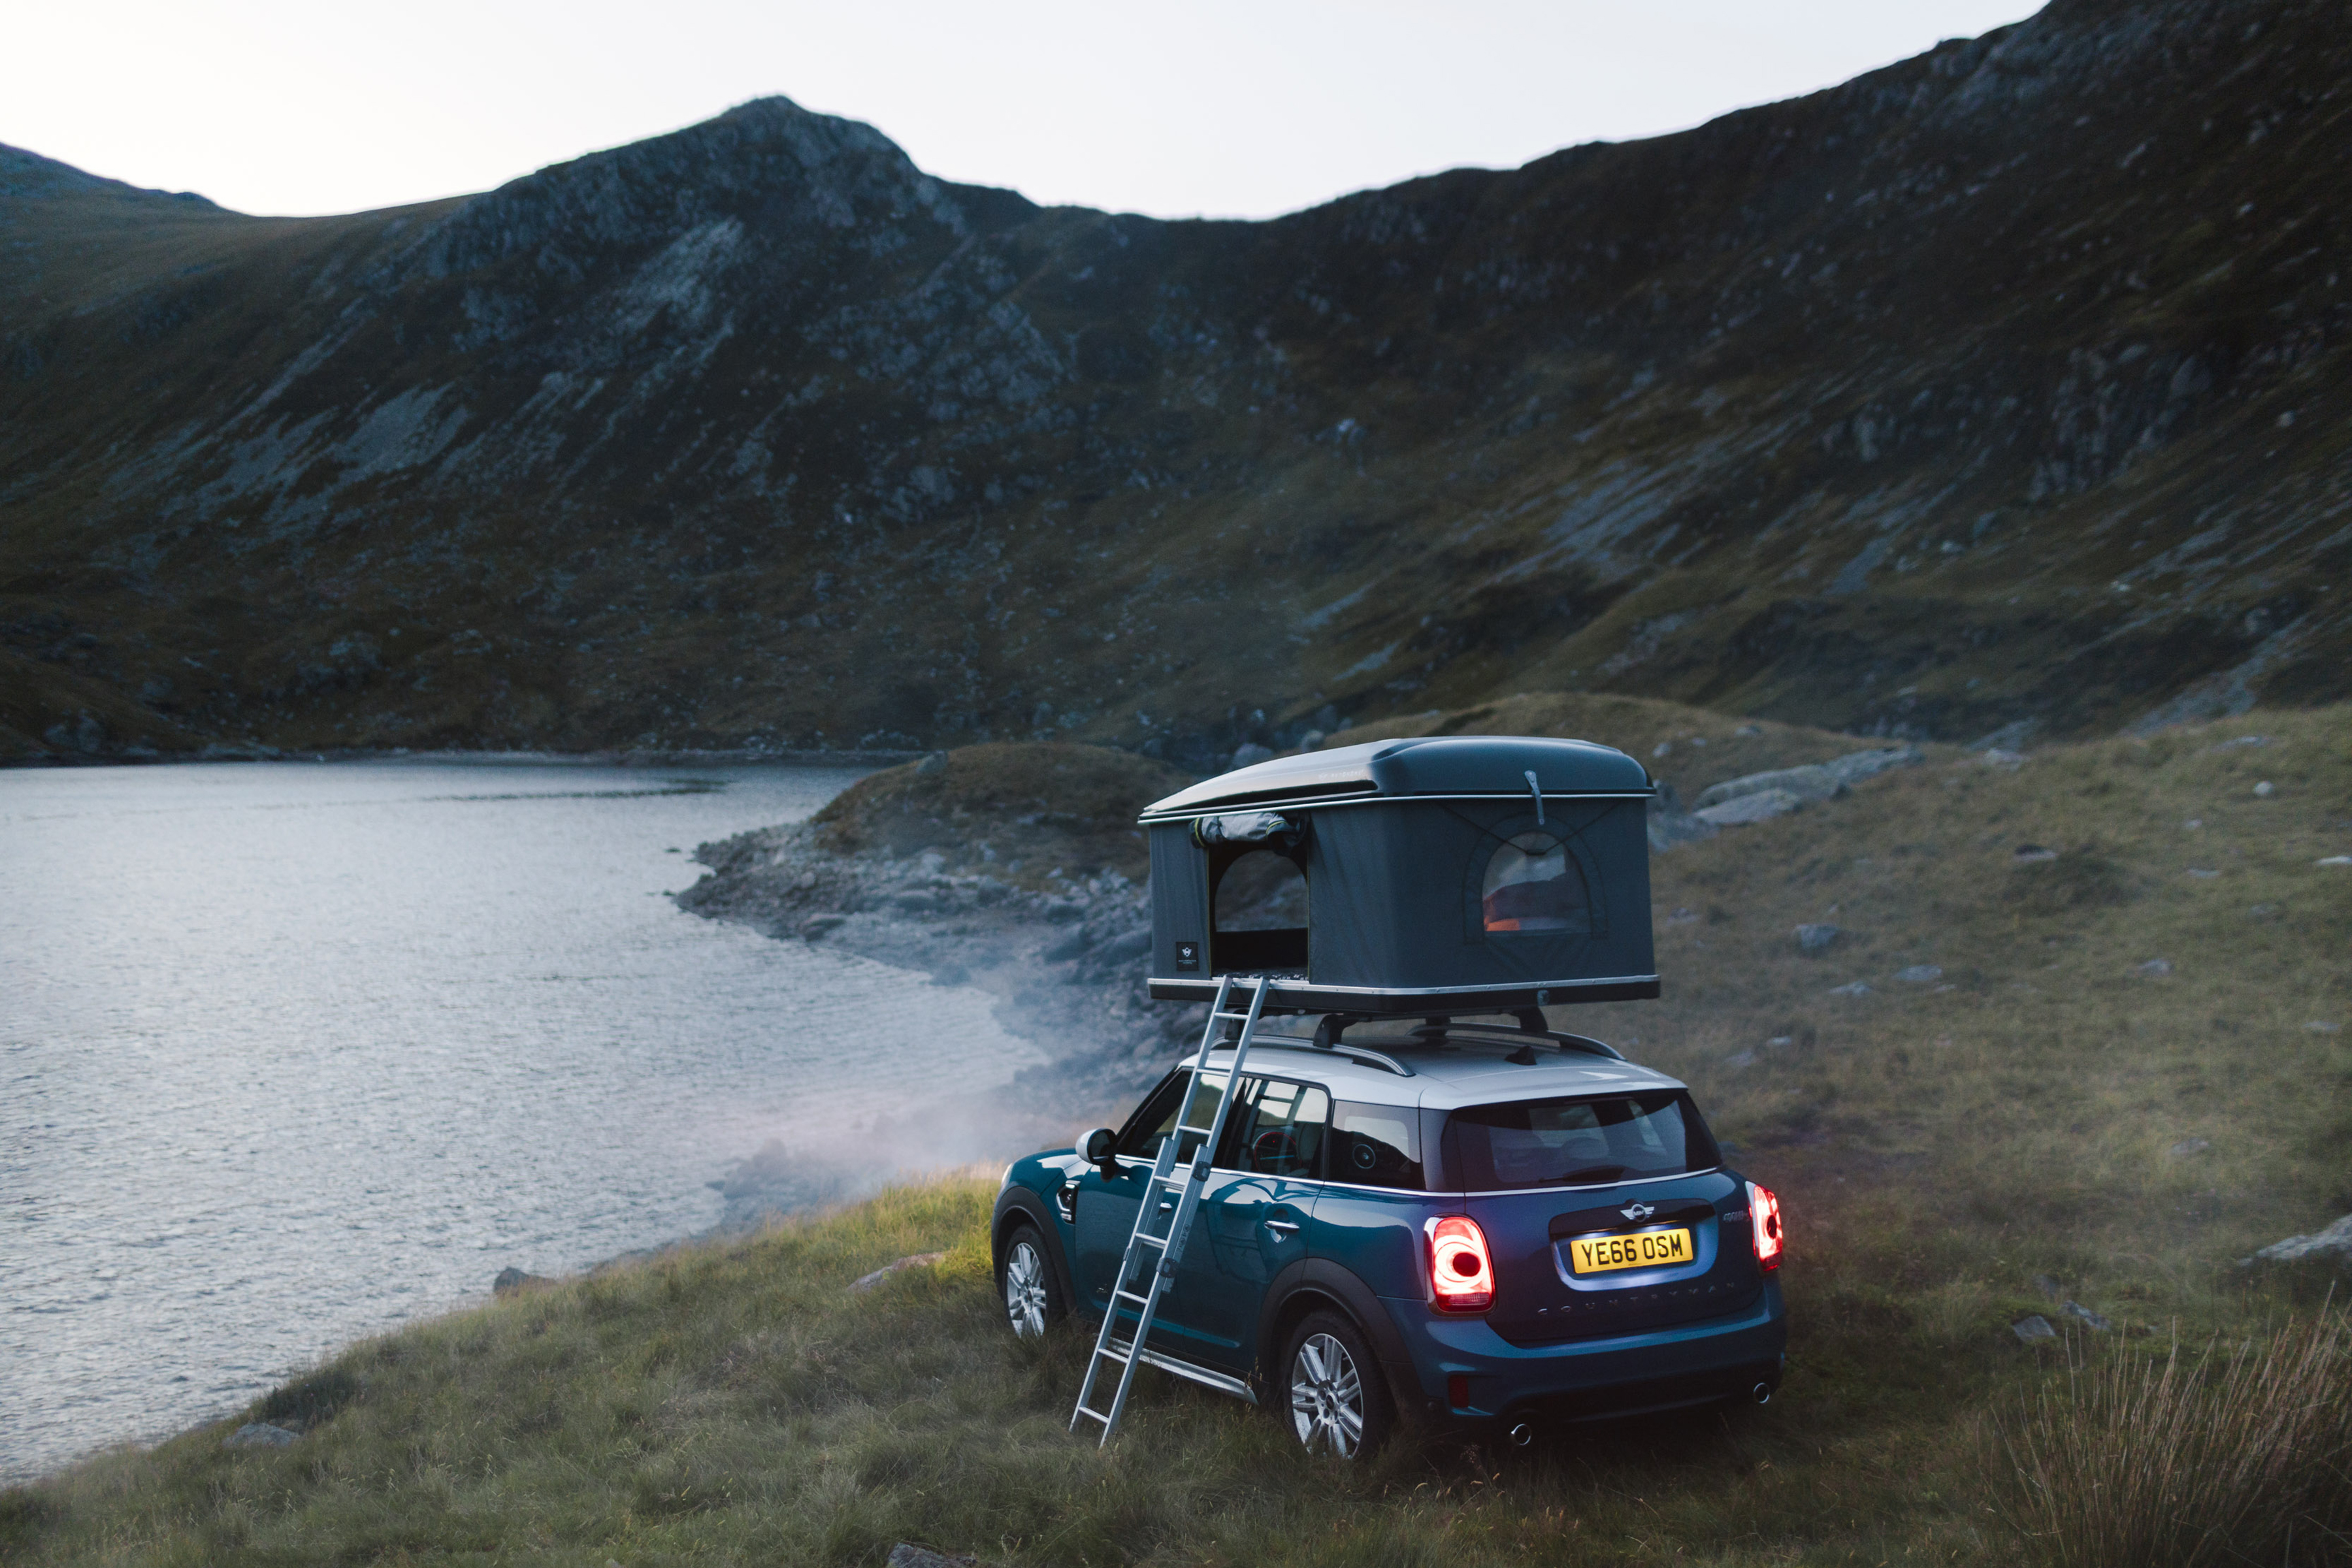 Sleep in a rooftop tent on a MINI Countryman